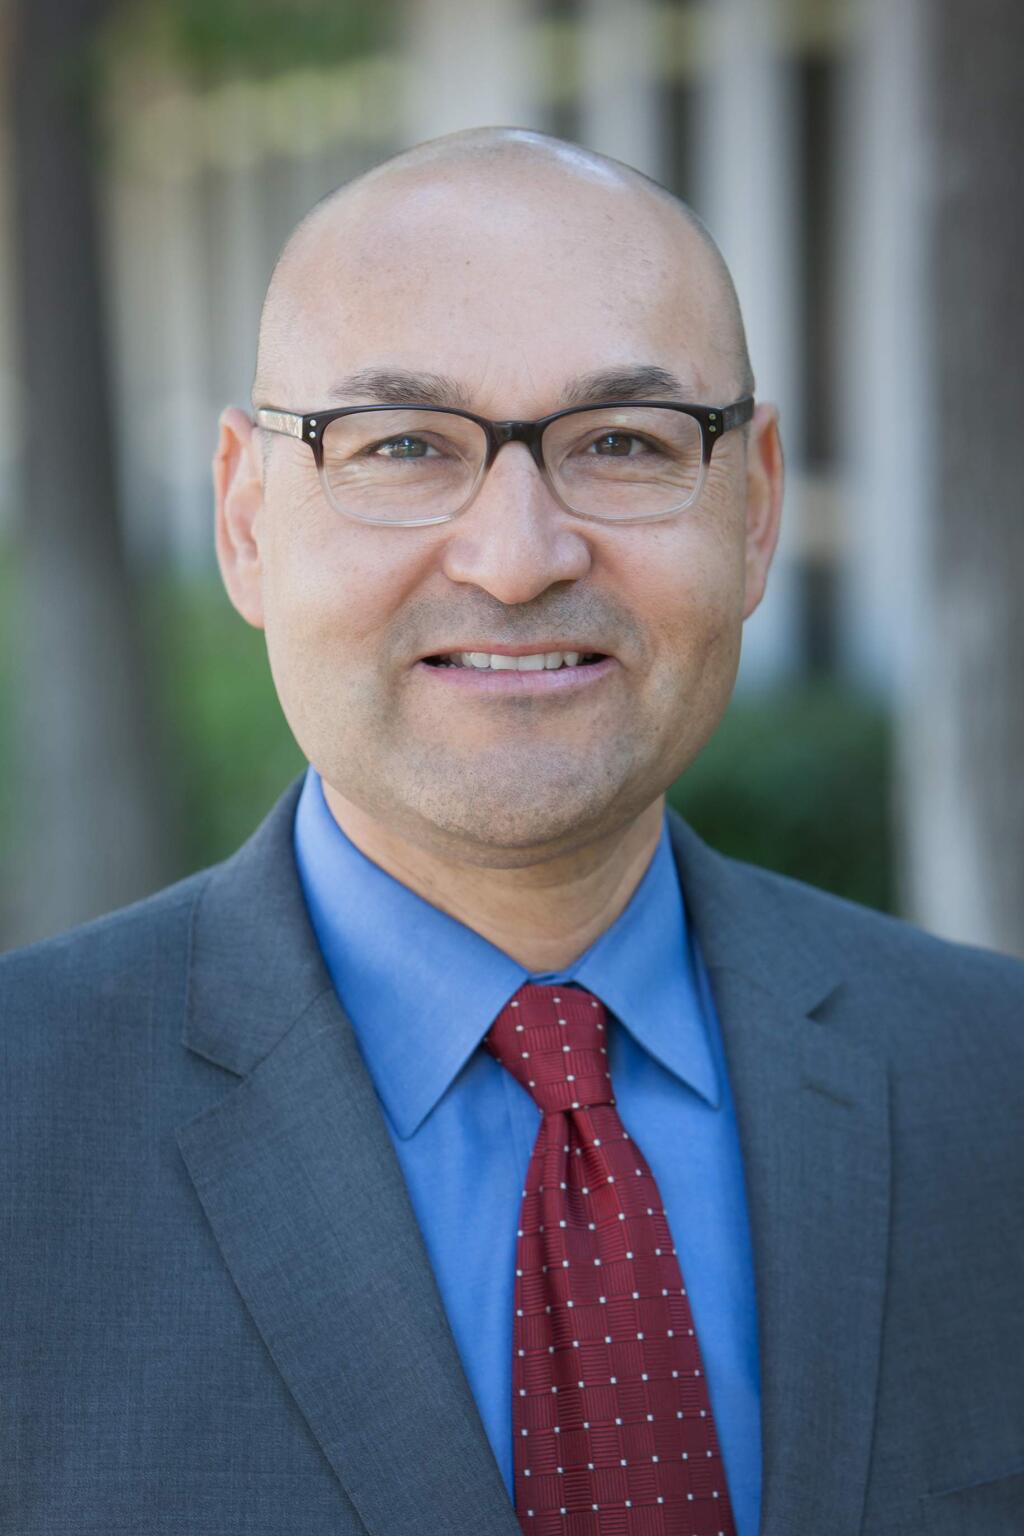 Pedro Avila assistant superintendent and vice president of student services at Santa Rosa Junior College